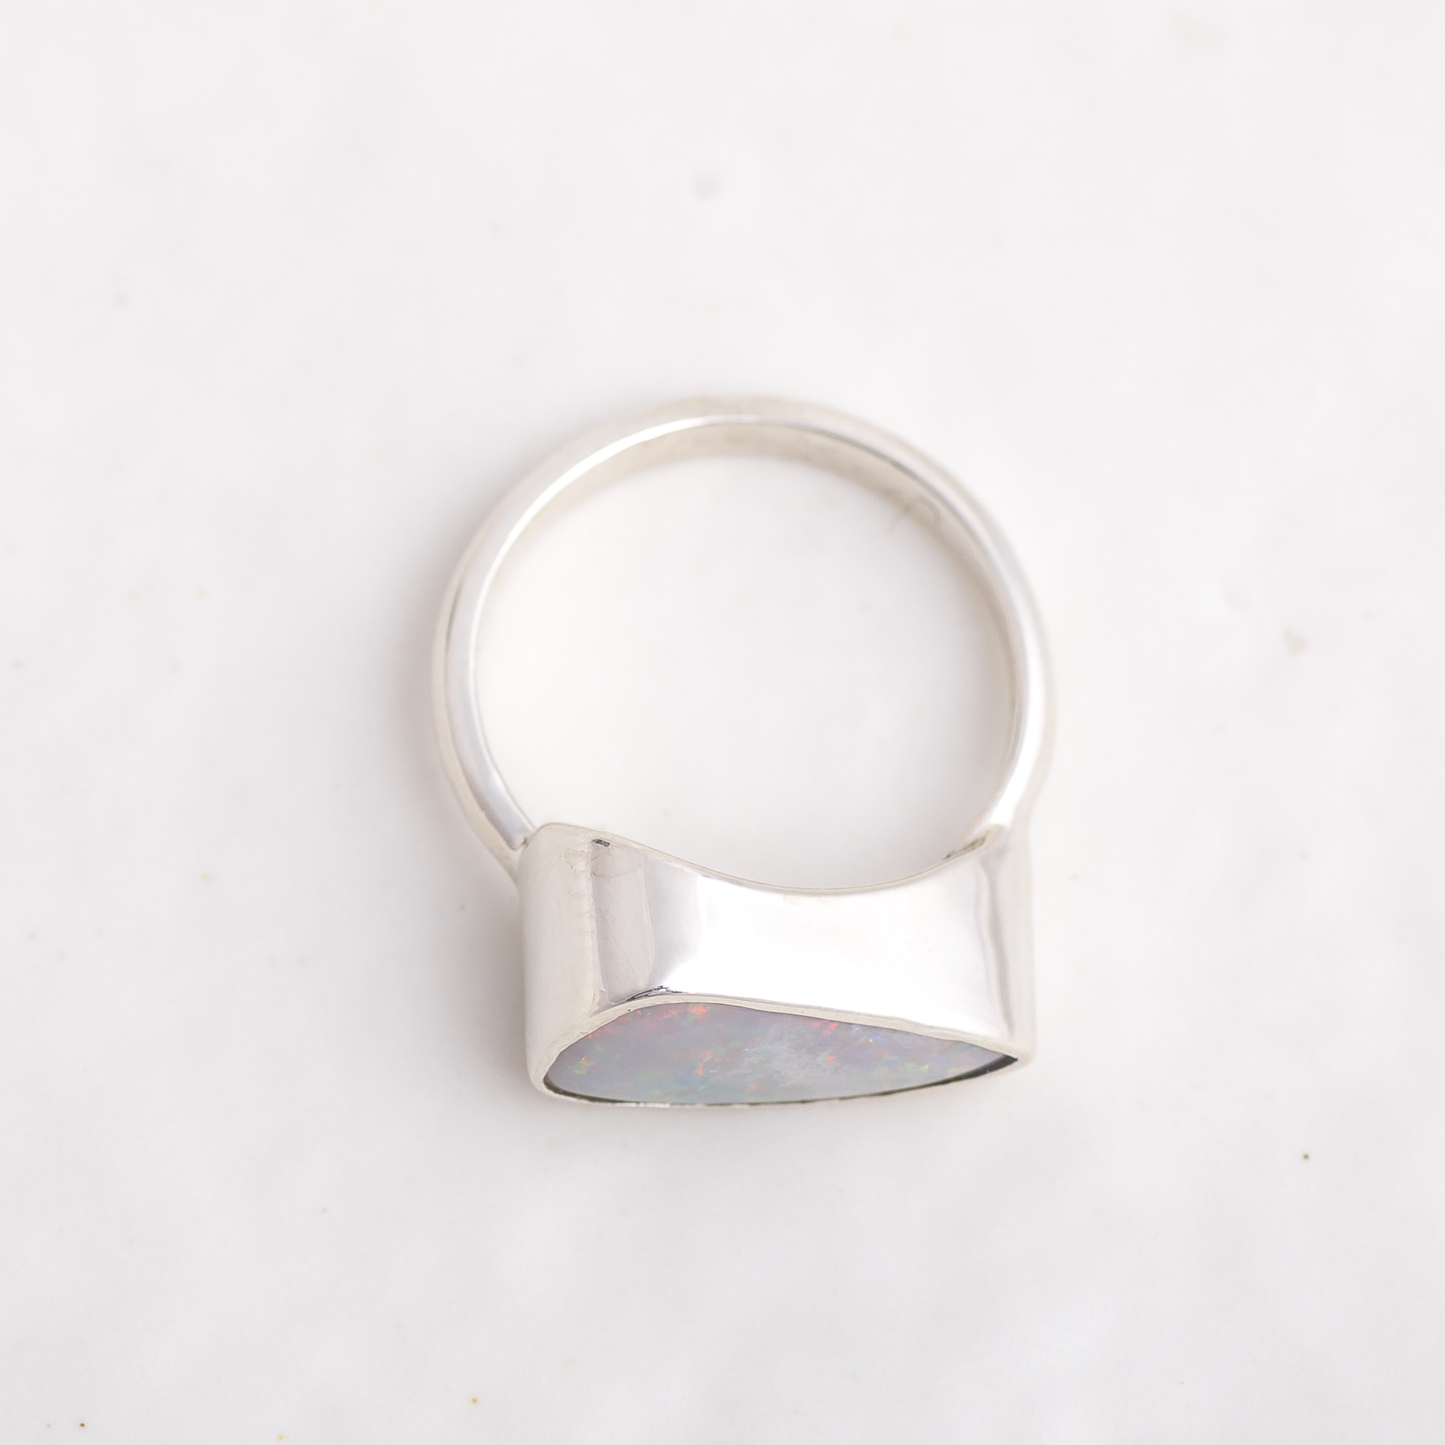 Opal East West Ring #6 ◇ Australian Opal ◇ Made in your size.